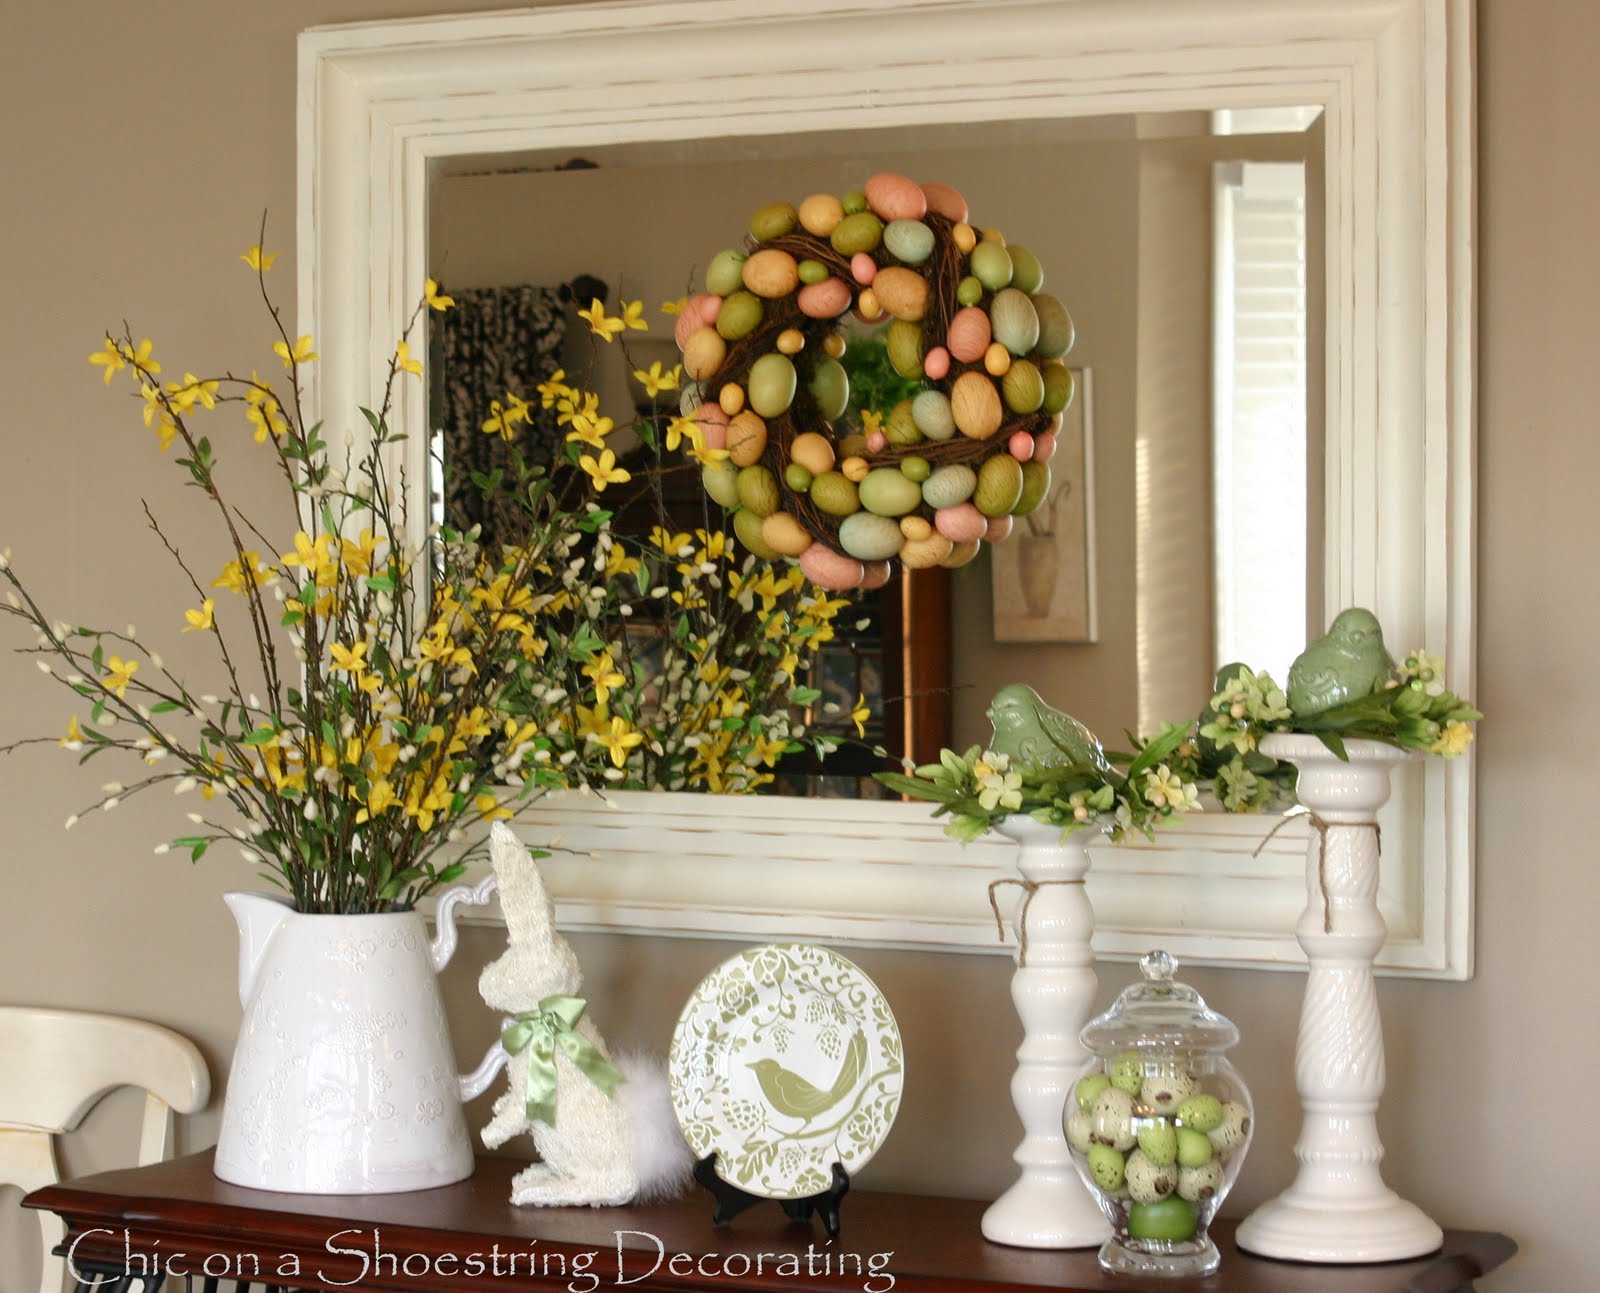 Chic on a Shoestring Decorating: Easter Eye Candy&hellip; No Calories!